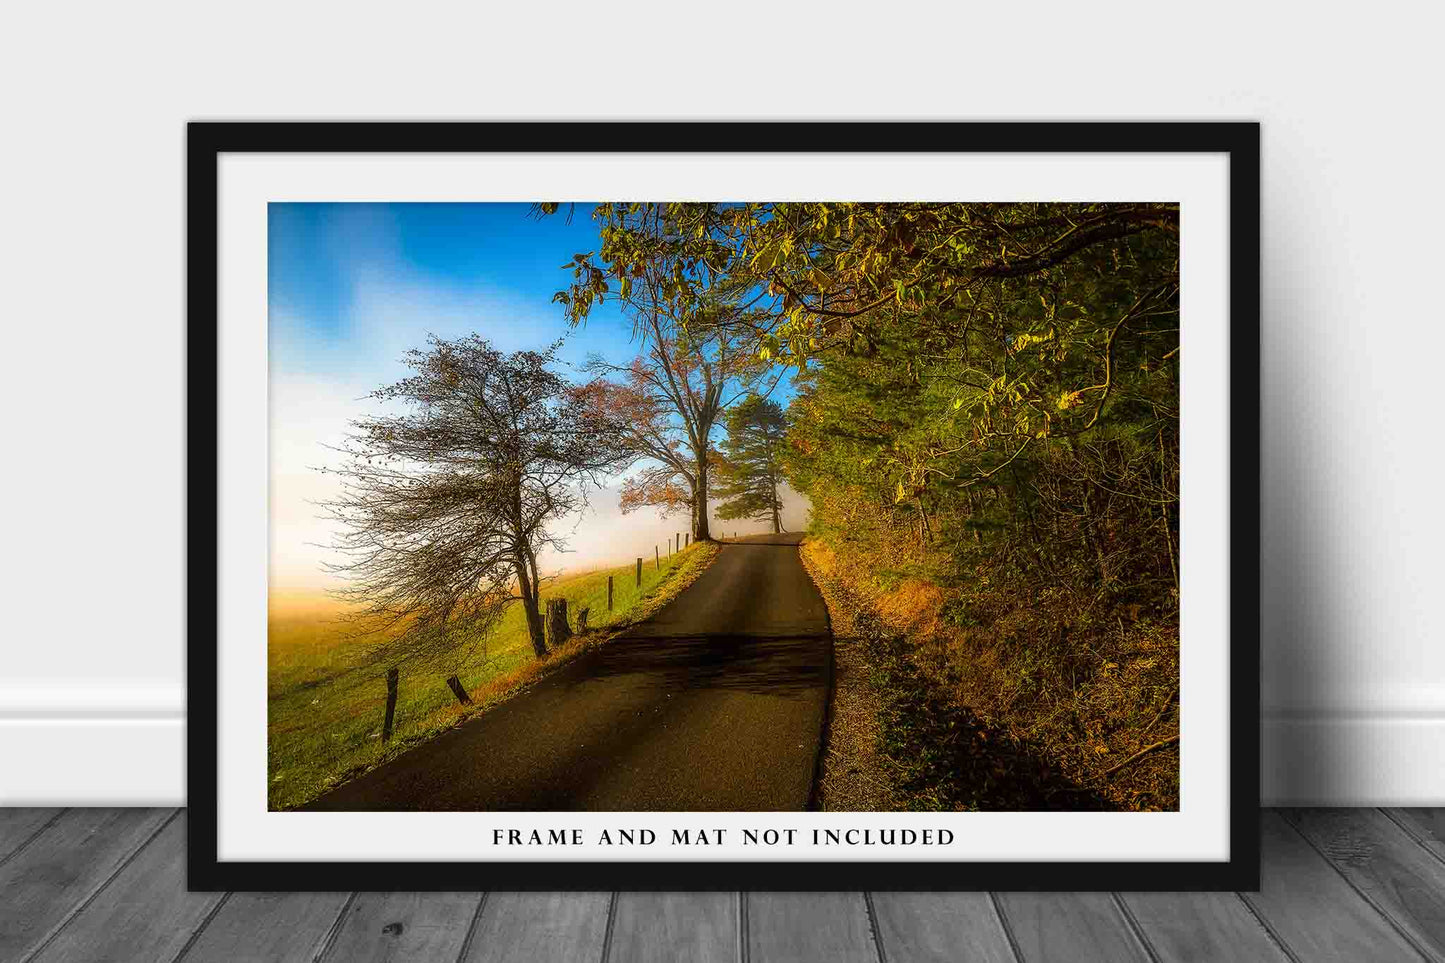 Smoky Mountains Art Print - Fine Art Photograph of Fog and Fall Colors Along Road in Whimsical Scene in Cades Cove Tennessee Landscape Photo